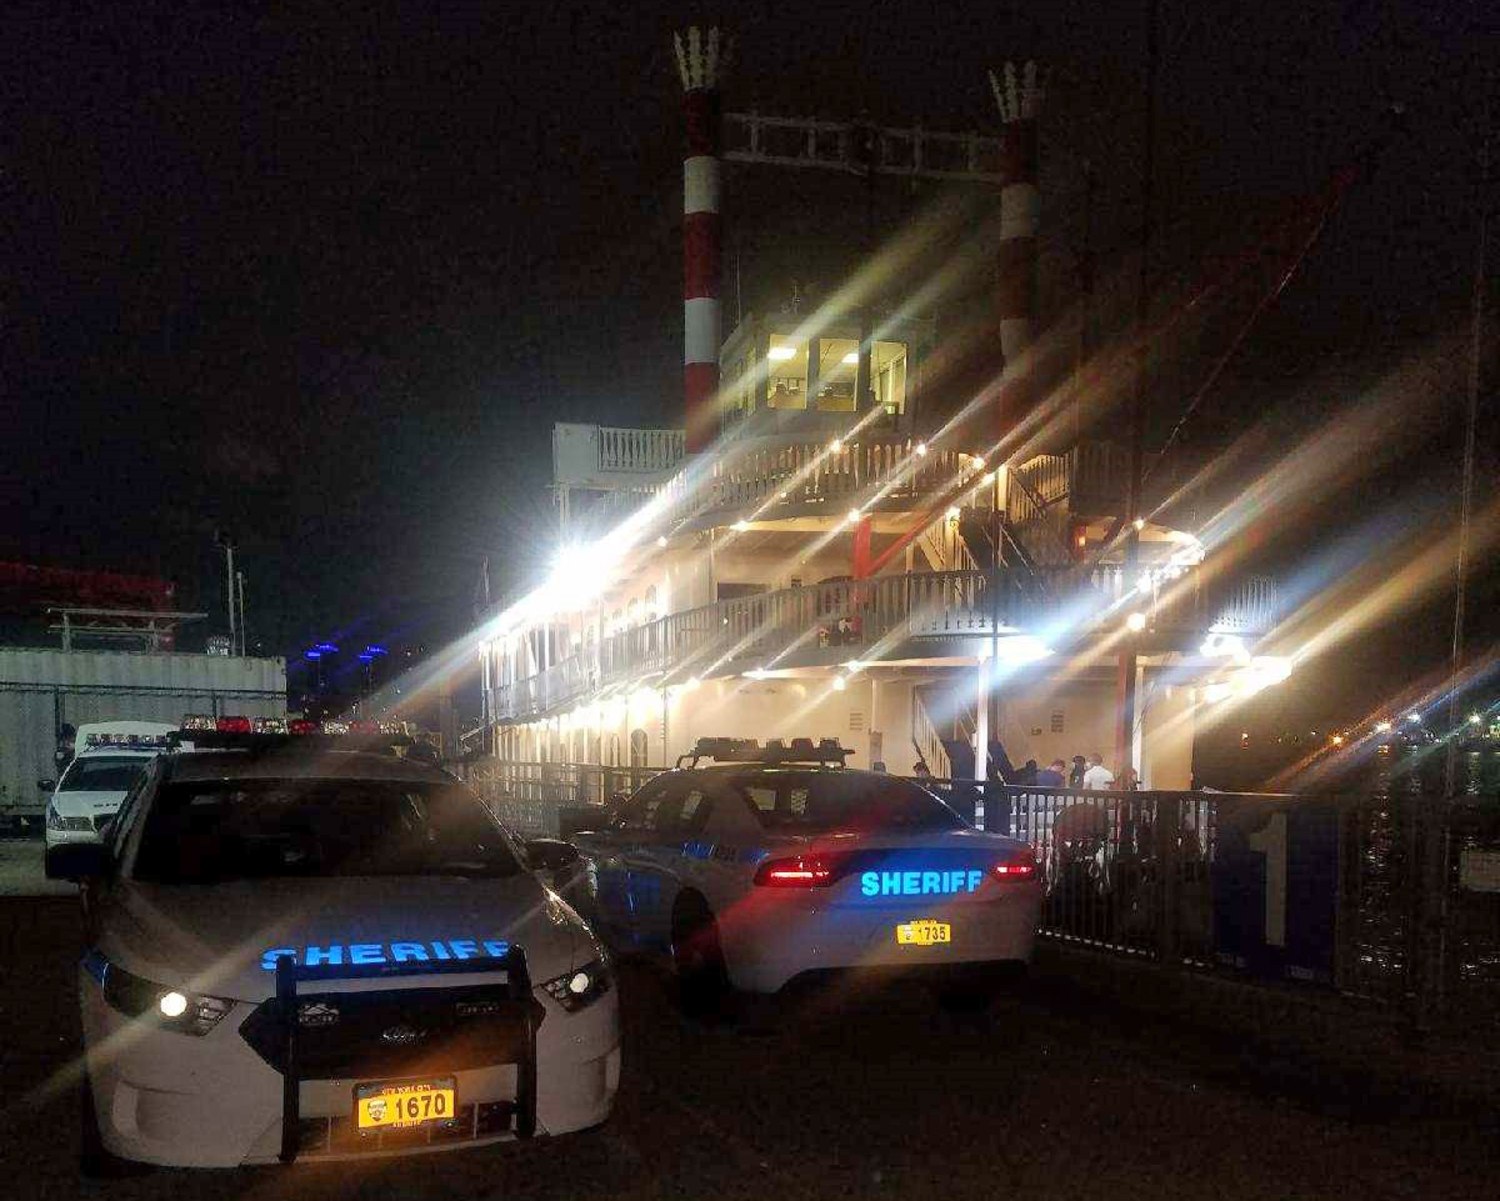 NYC party ship owners arrested, charged with breaking coronavirus orders on booze cruise pic picture